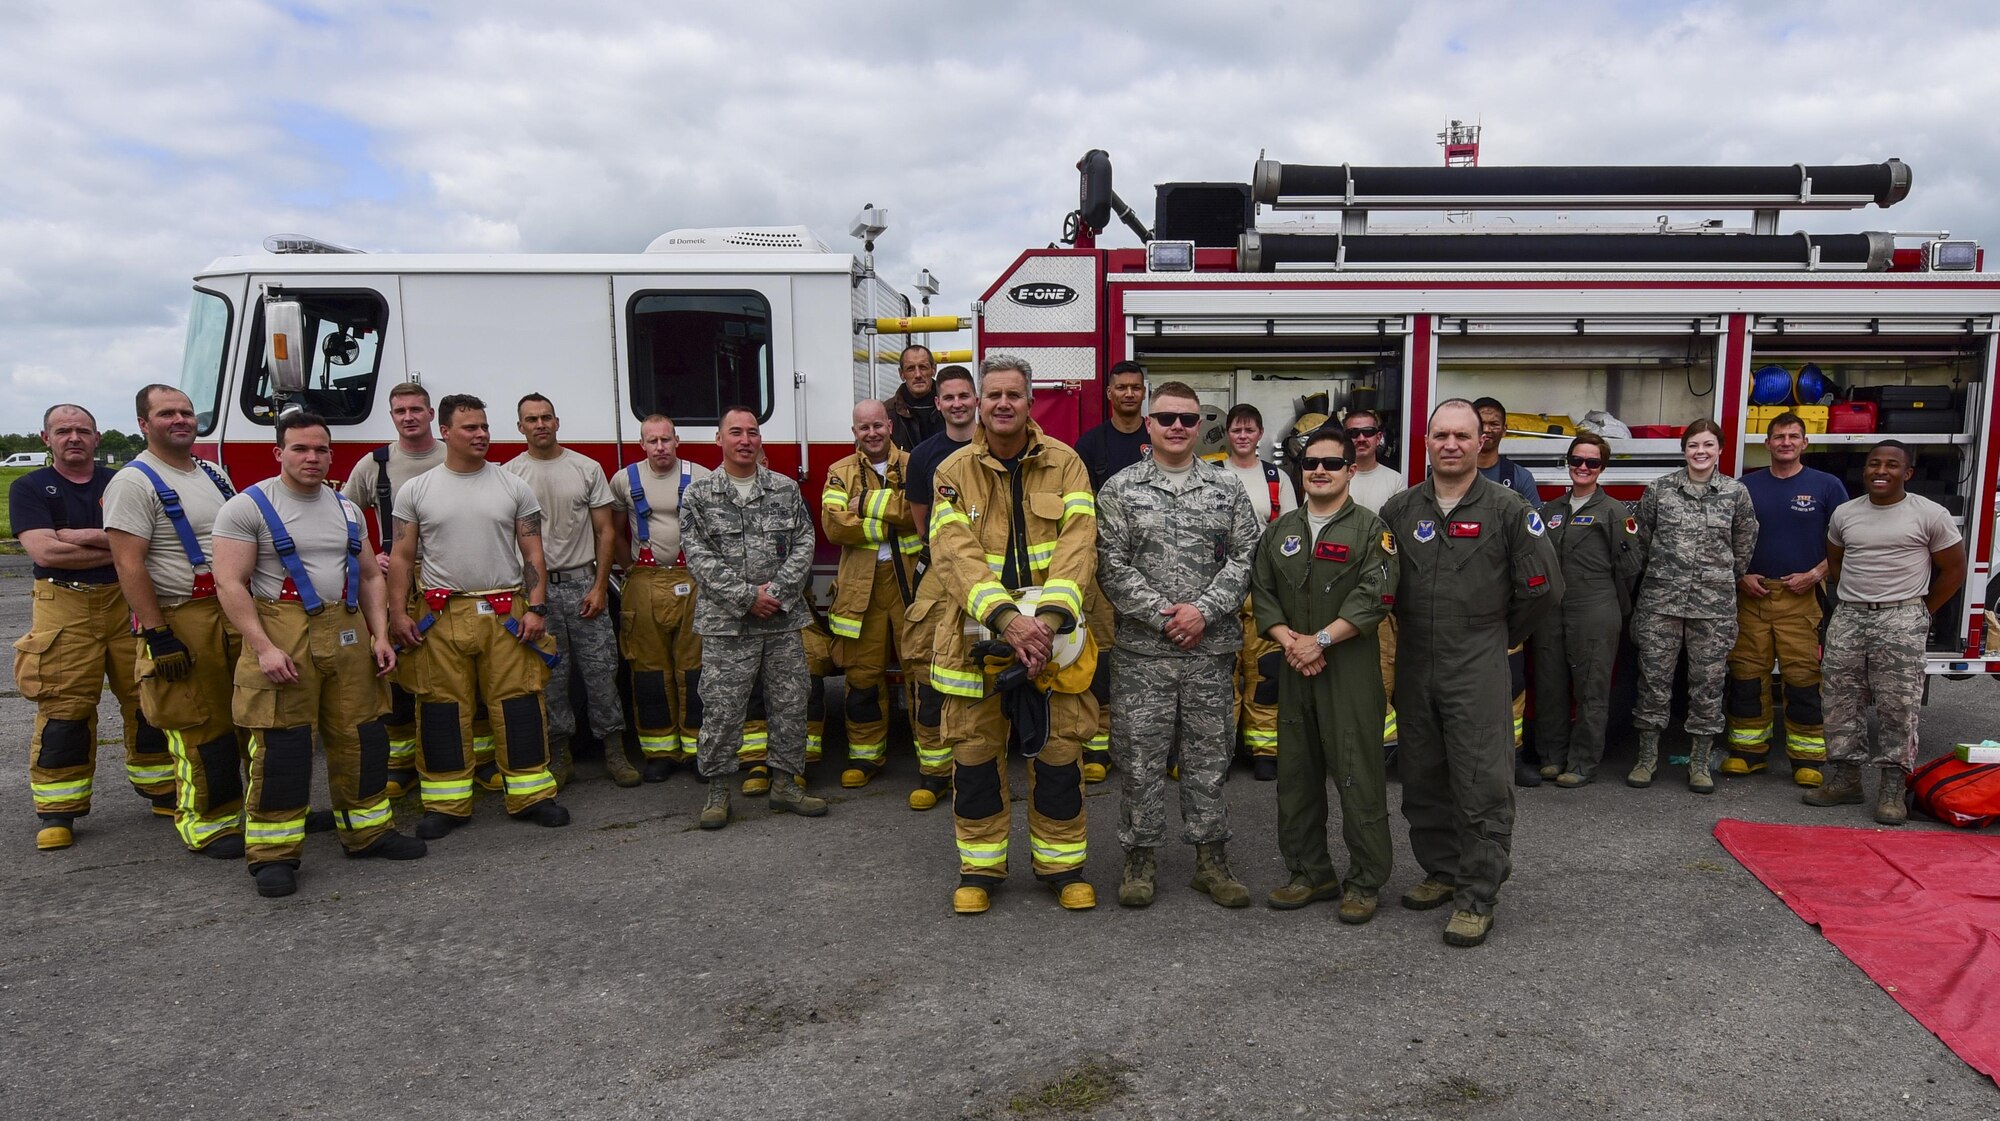 Royal Air Force Firefighters and U.S. Air Force Airmen stand together after a medical exercise at Royal Air Force Fairford, U.K., June 13, 2017. Exercises involving multiple departments provide opportunities to increase interoperability and readiness. (U.S. Air Force photo by Airman 1st Class Randahl J. Jenson)